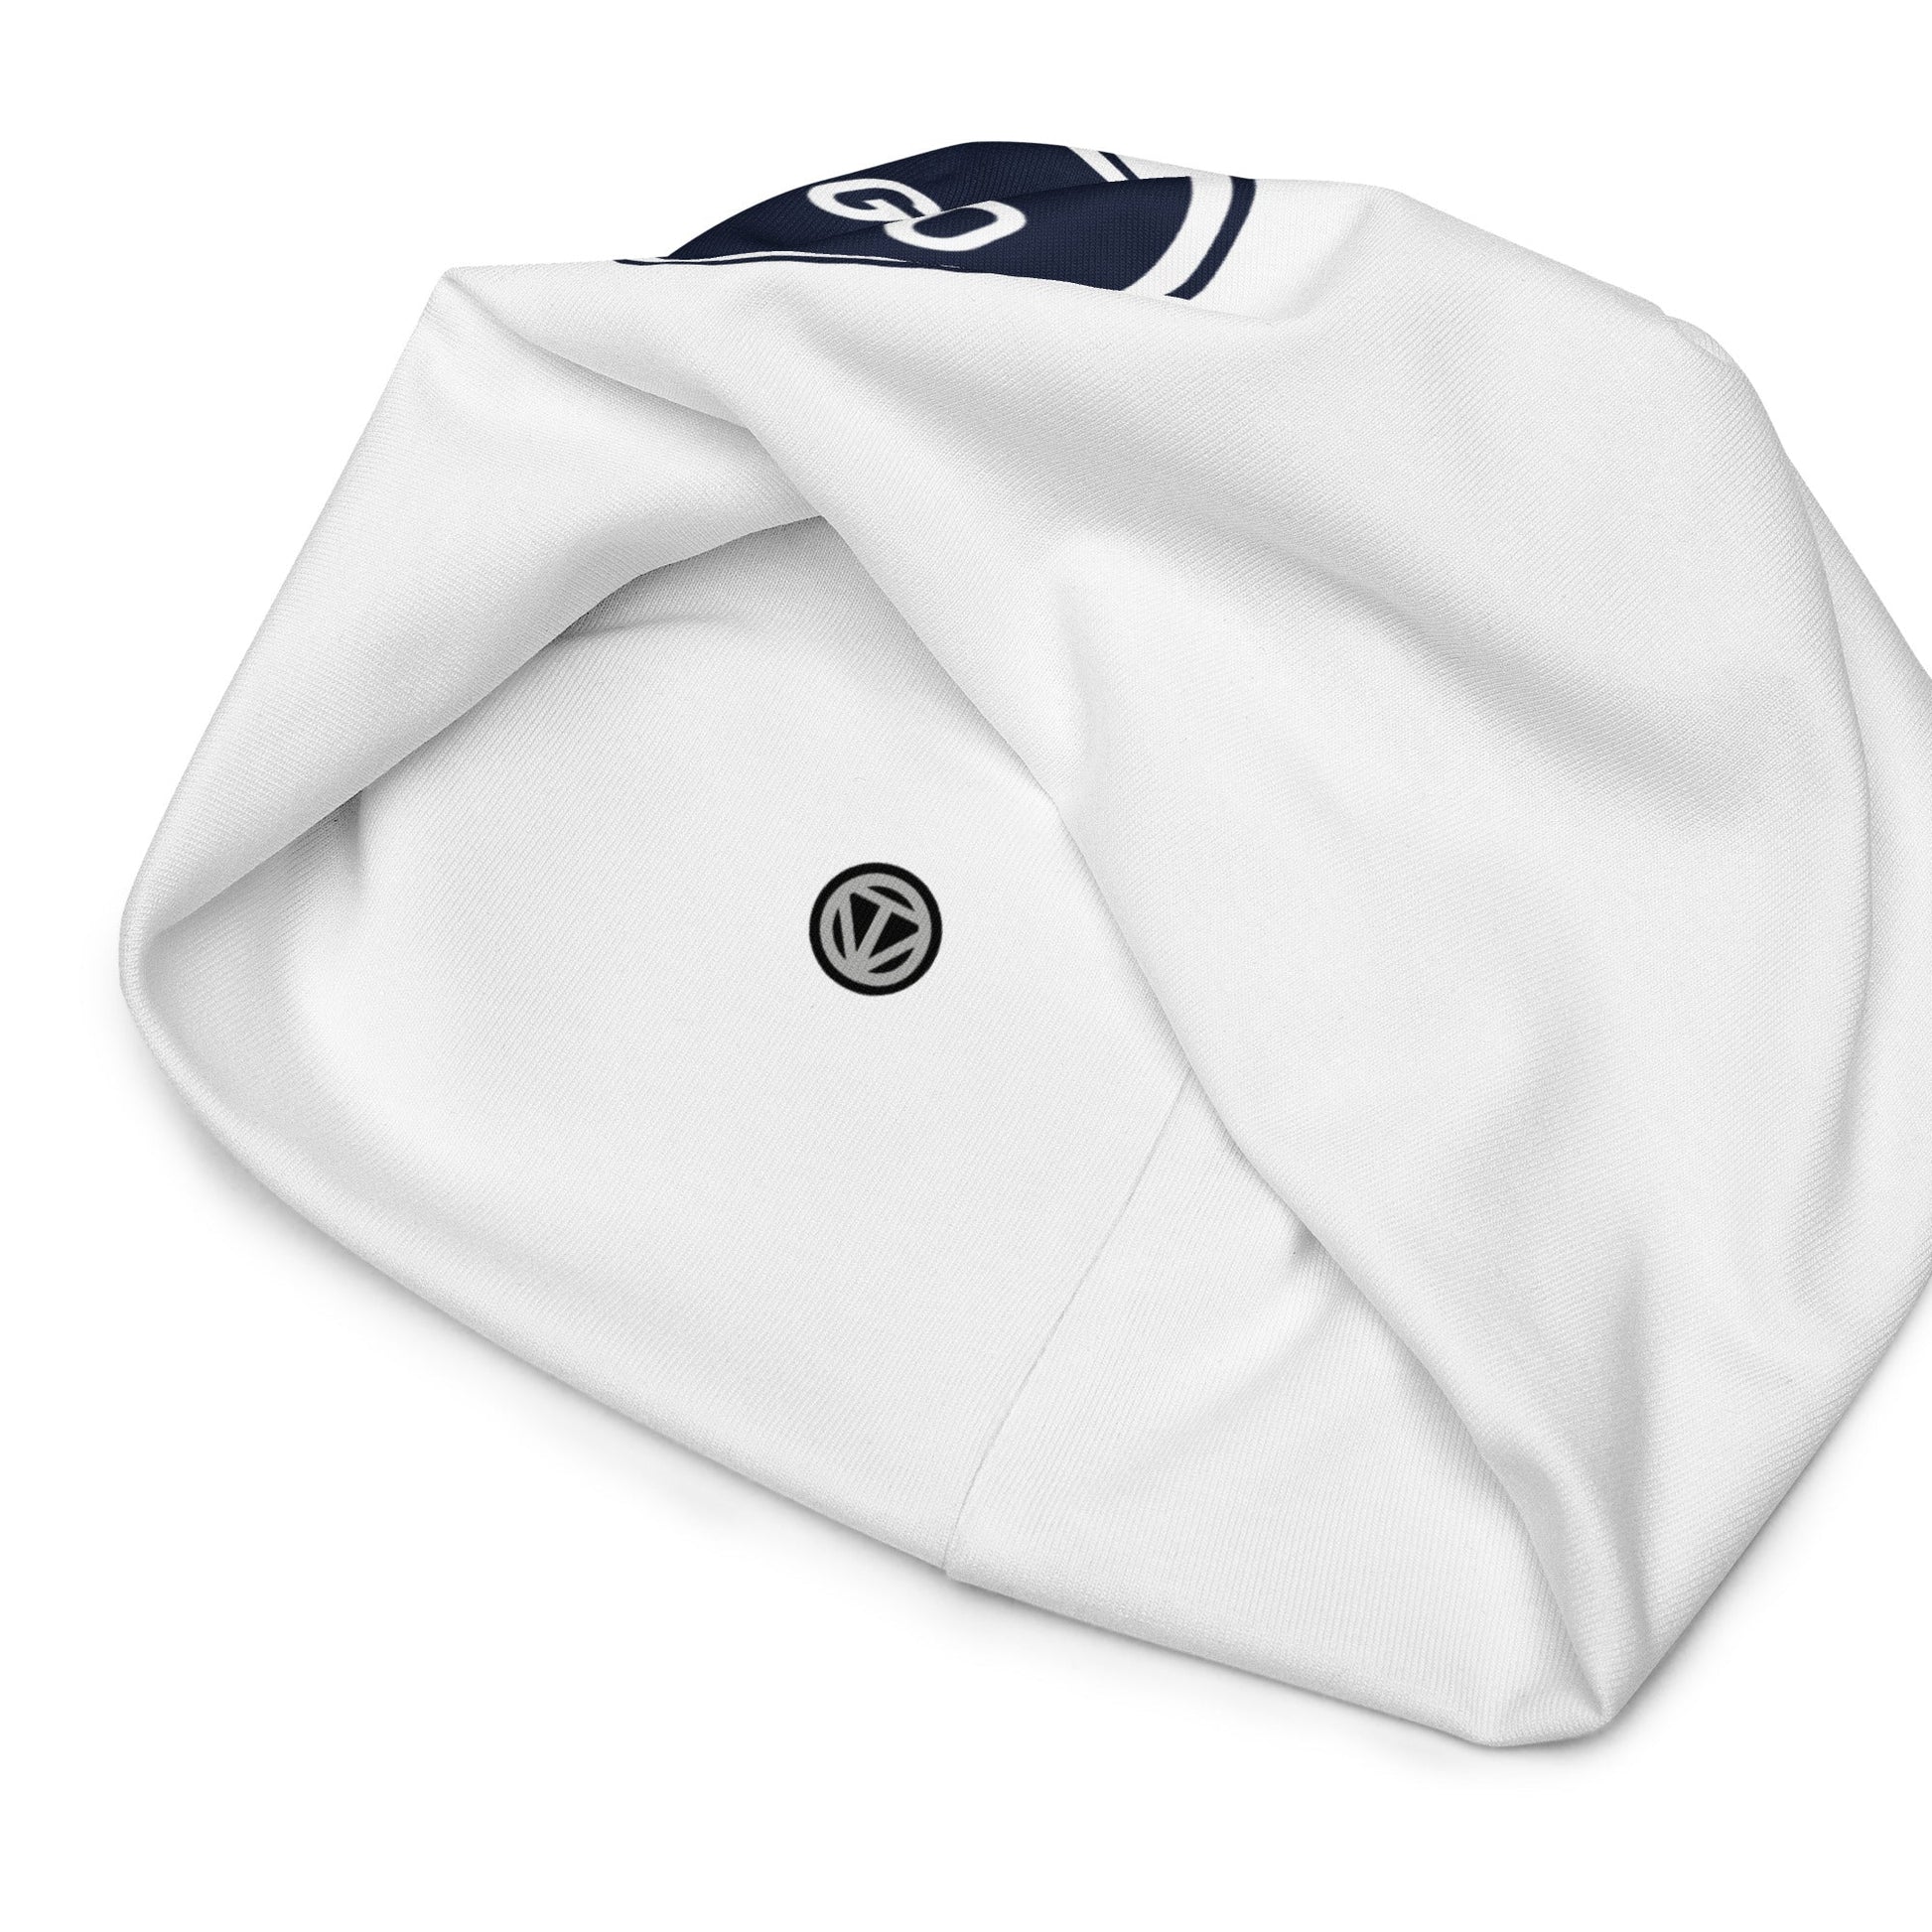 TIME OF VIBES - Beanie Demo CORPORATE - €29.50